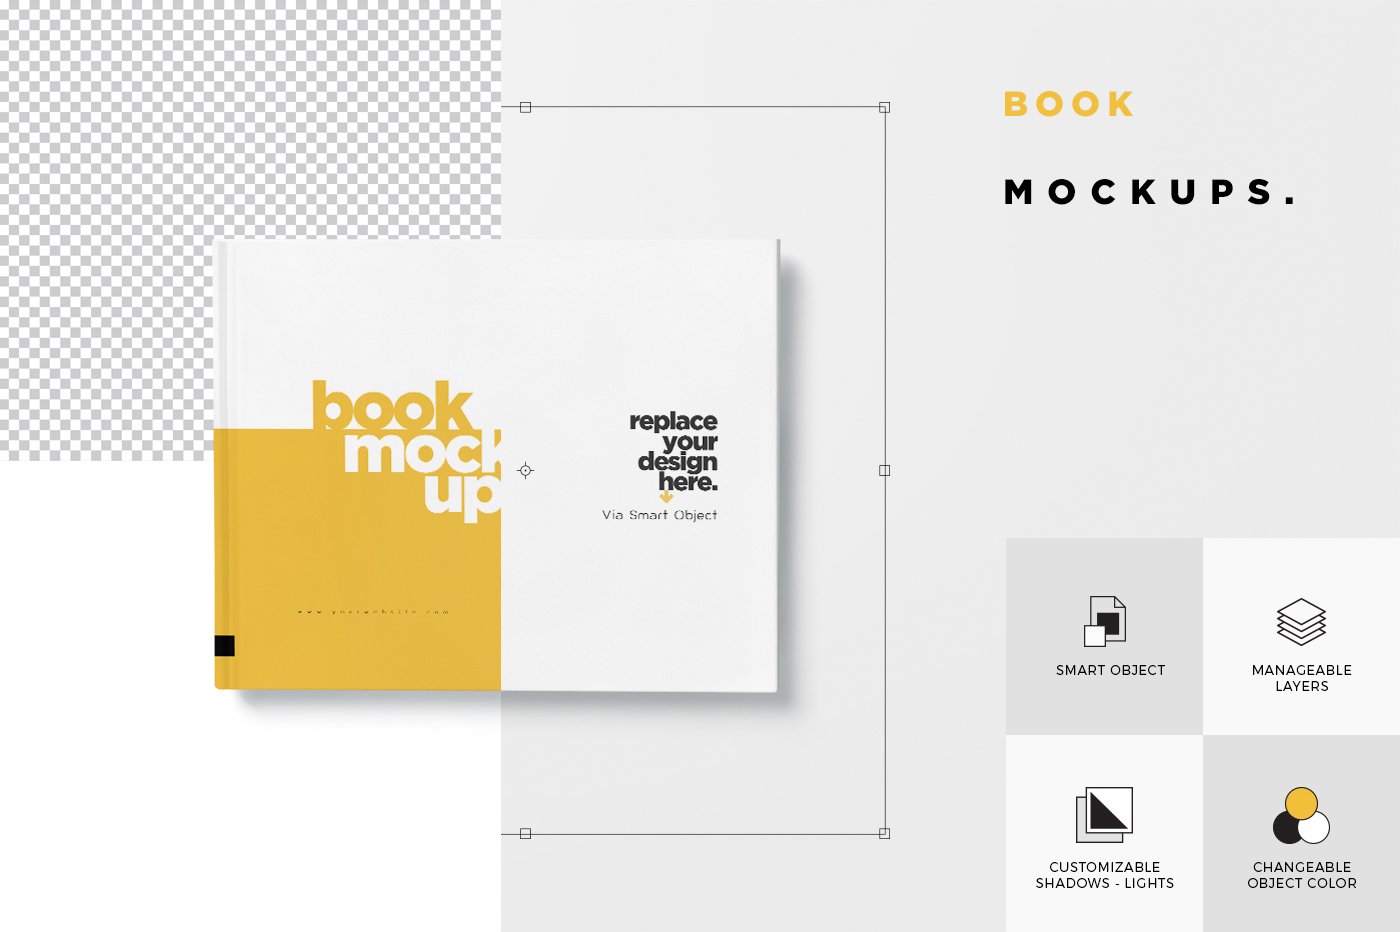 mockup features image 504